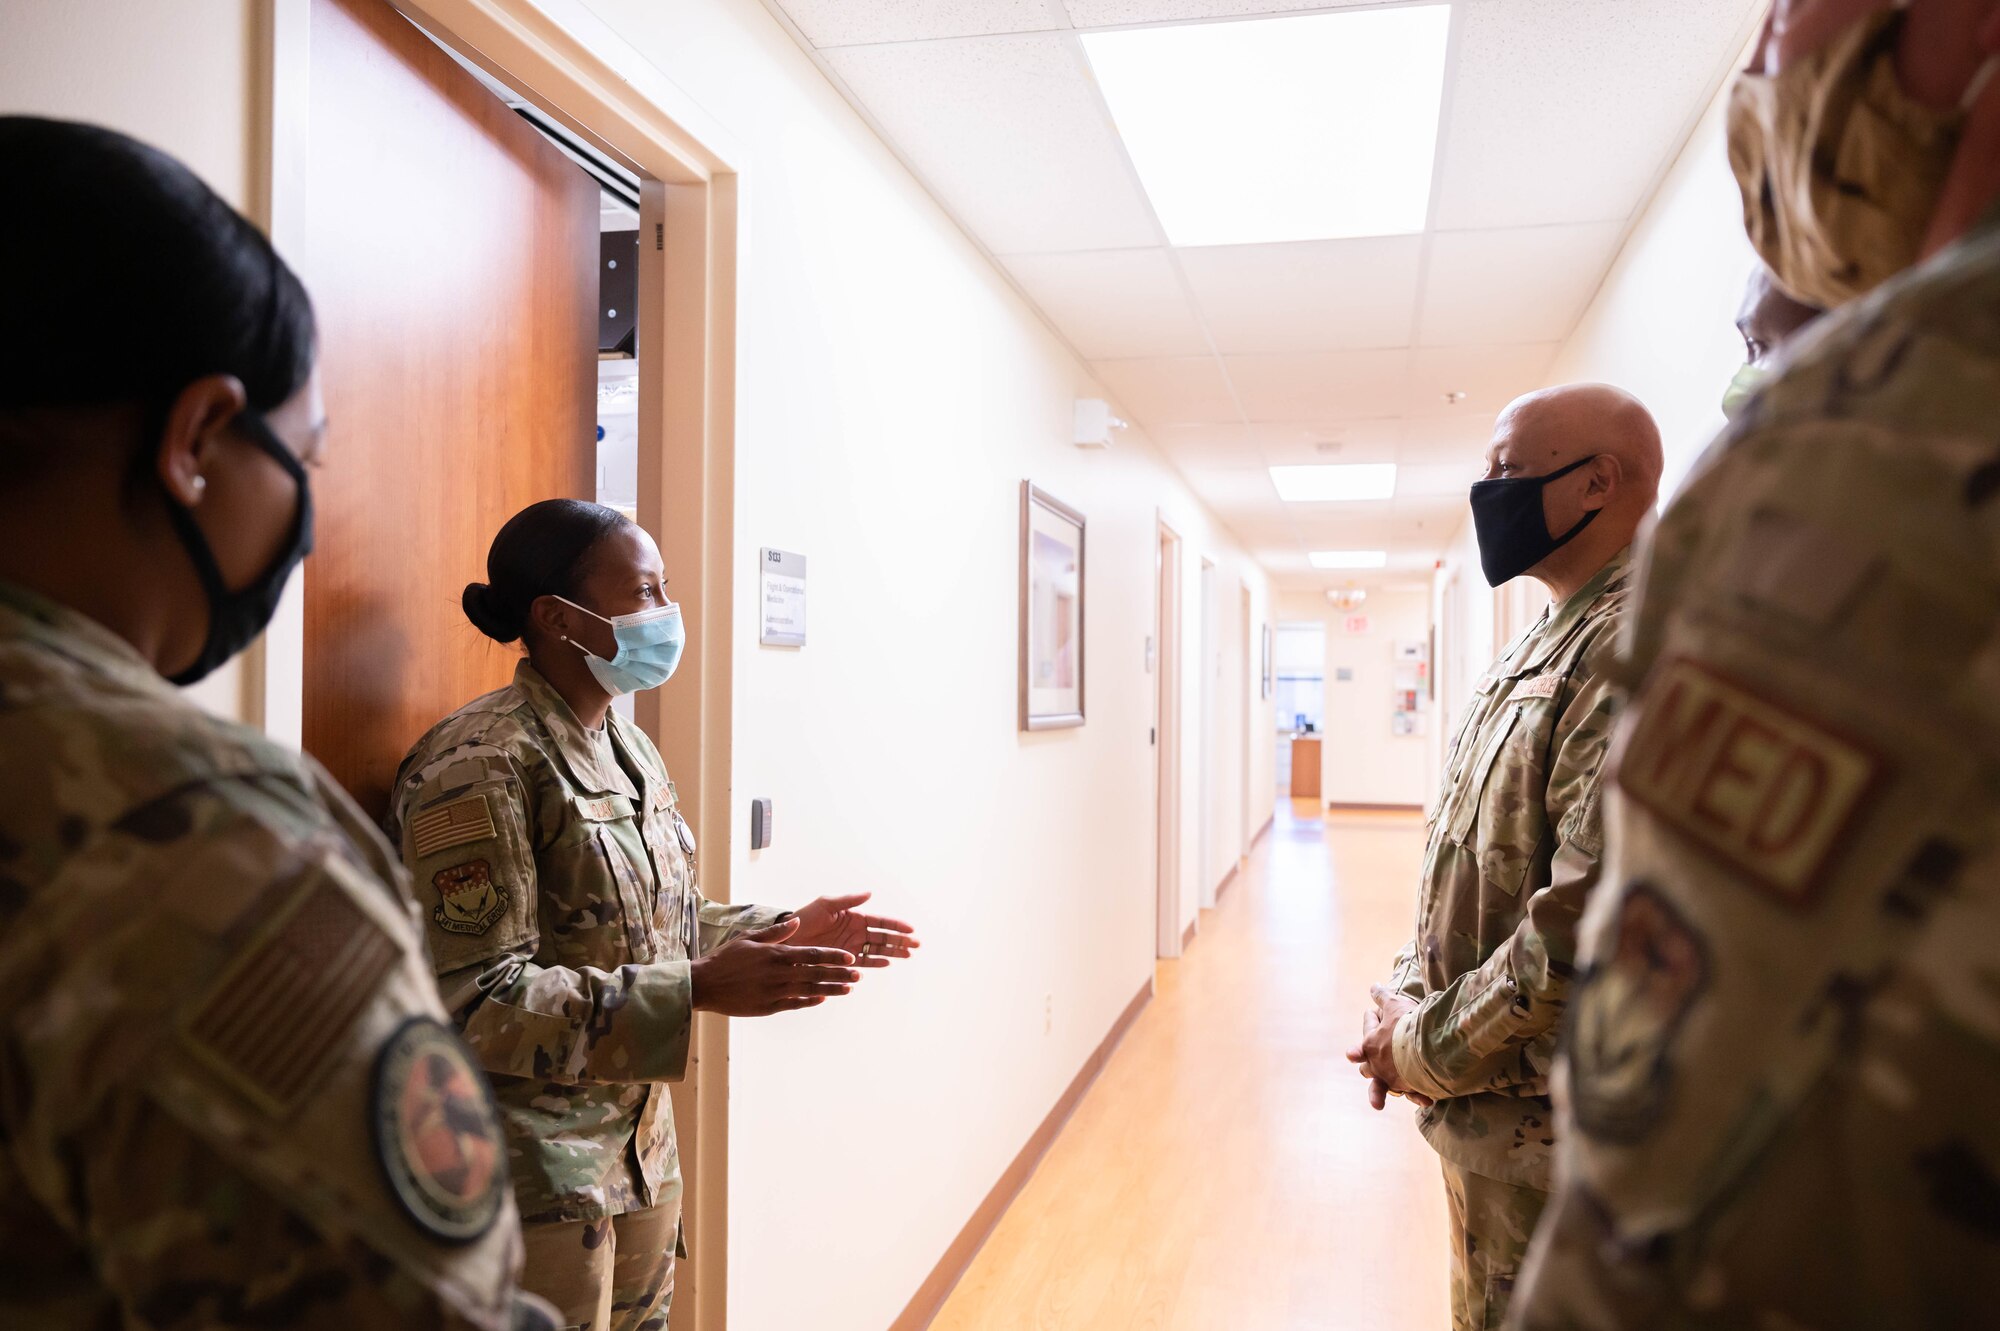 Master Sgt. Ashley Fuquay, 341st Operational Medical Readiness Squadron personnel reliability assurance program flight chief, left, explains how the 341st Medical Group manages its PRAP program to Gen. Anthony Cotton, left, Air Force Global Strike Command commander Oct. 27, 2021, at Malmstrom Air Force Base, Mont.